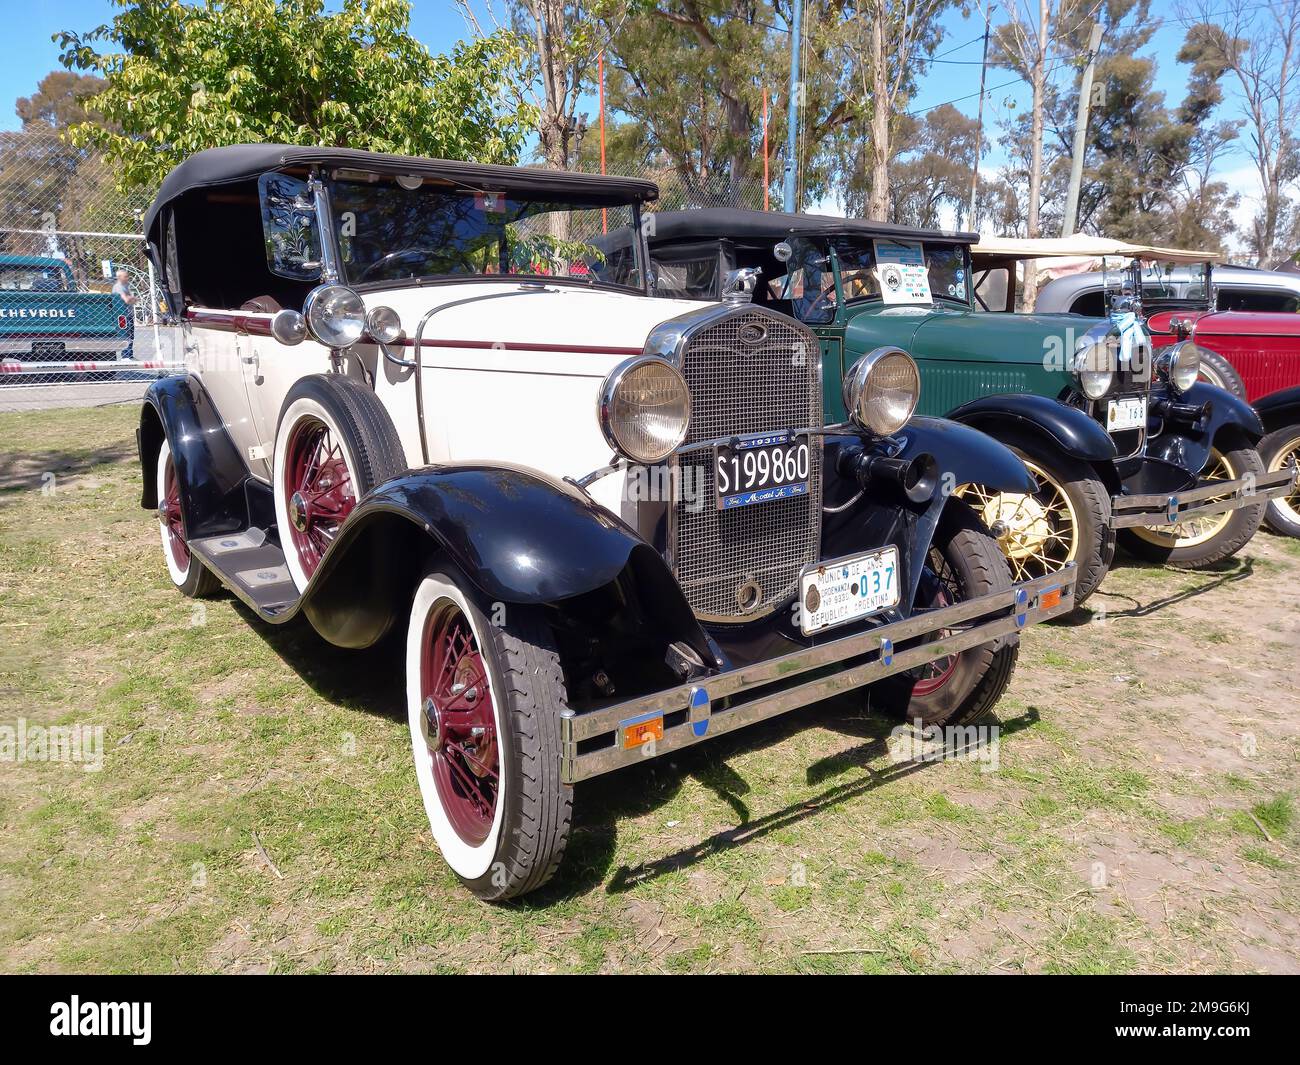 Vintage white 1931 Ford Model A four door Phaeton convertible by General Motors in a park. Nature, grass, trees. AAA 2022 classic car show. Stock Photo